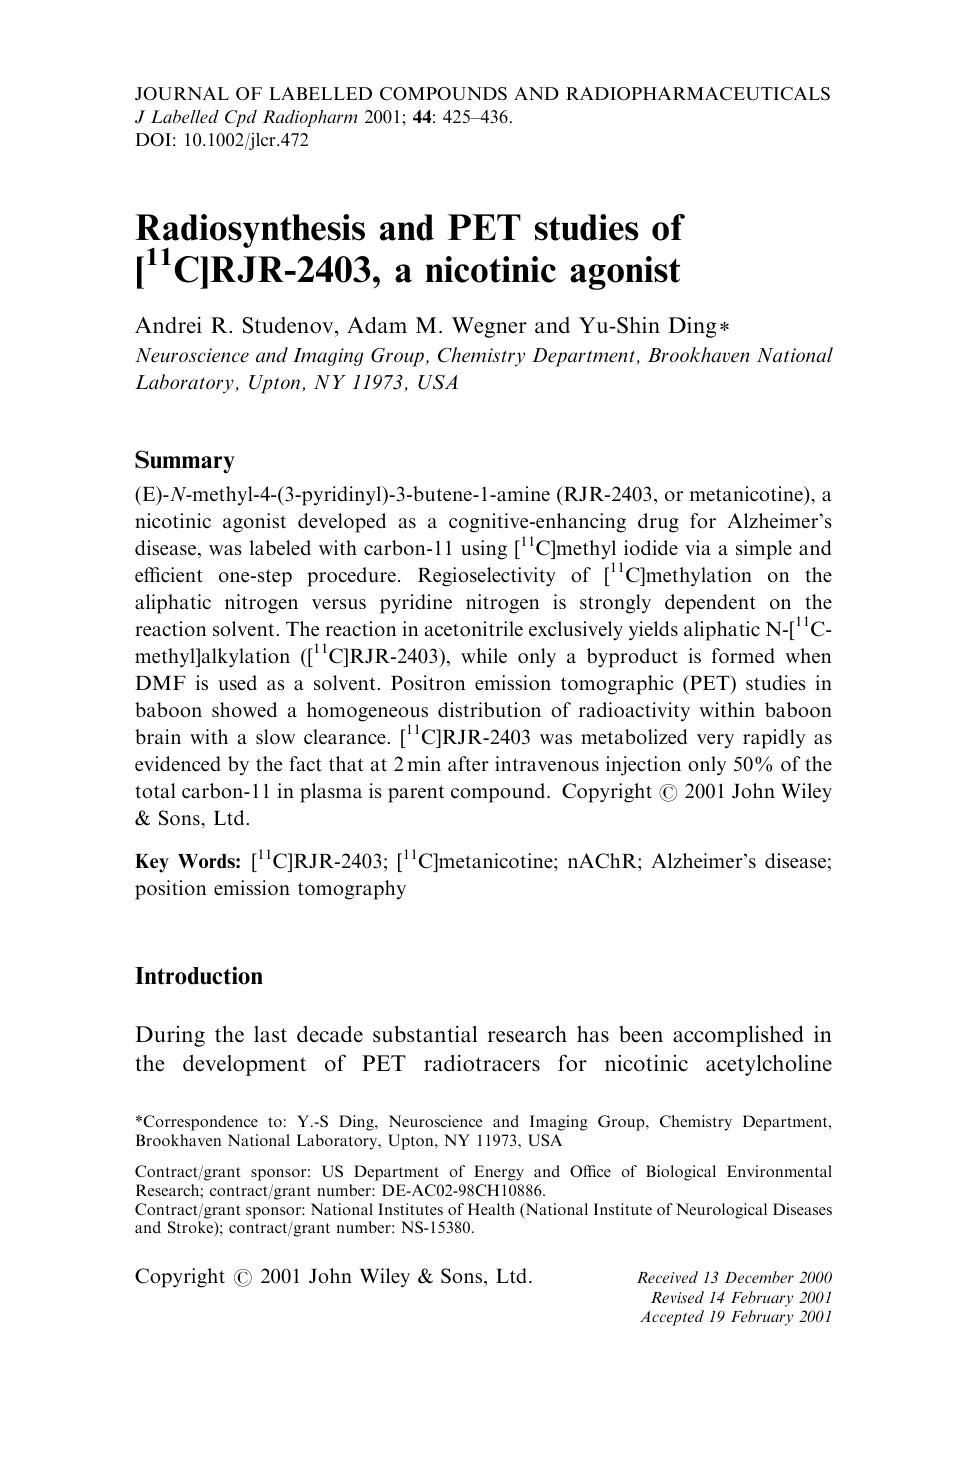 Radiosynthesis and PET studies of [11C]RJR-2403, a nicotinic agonist by Unknown